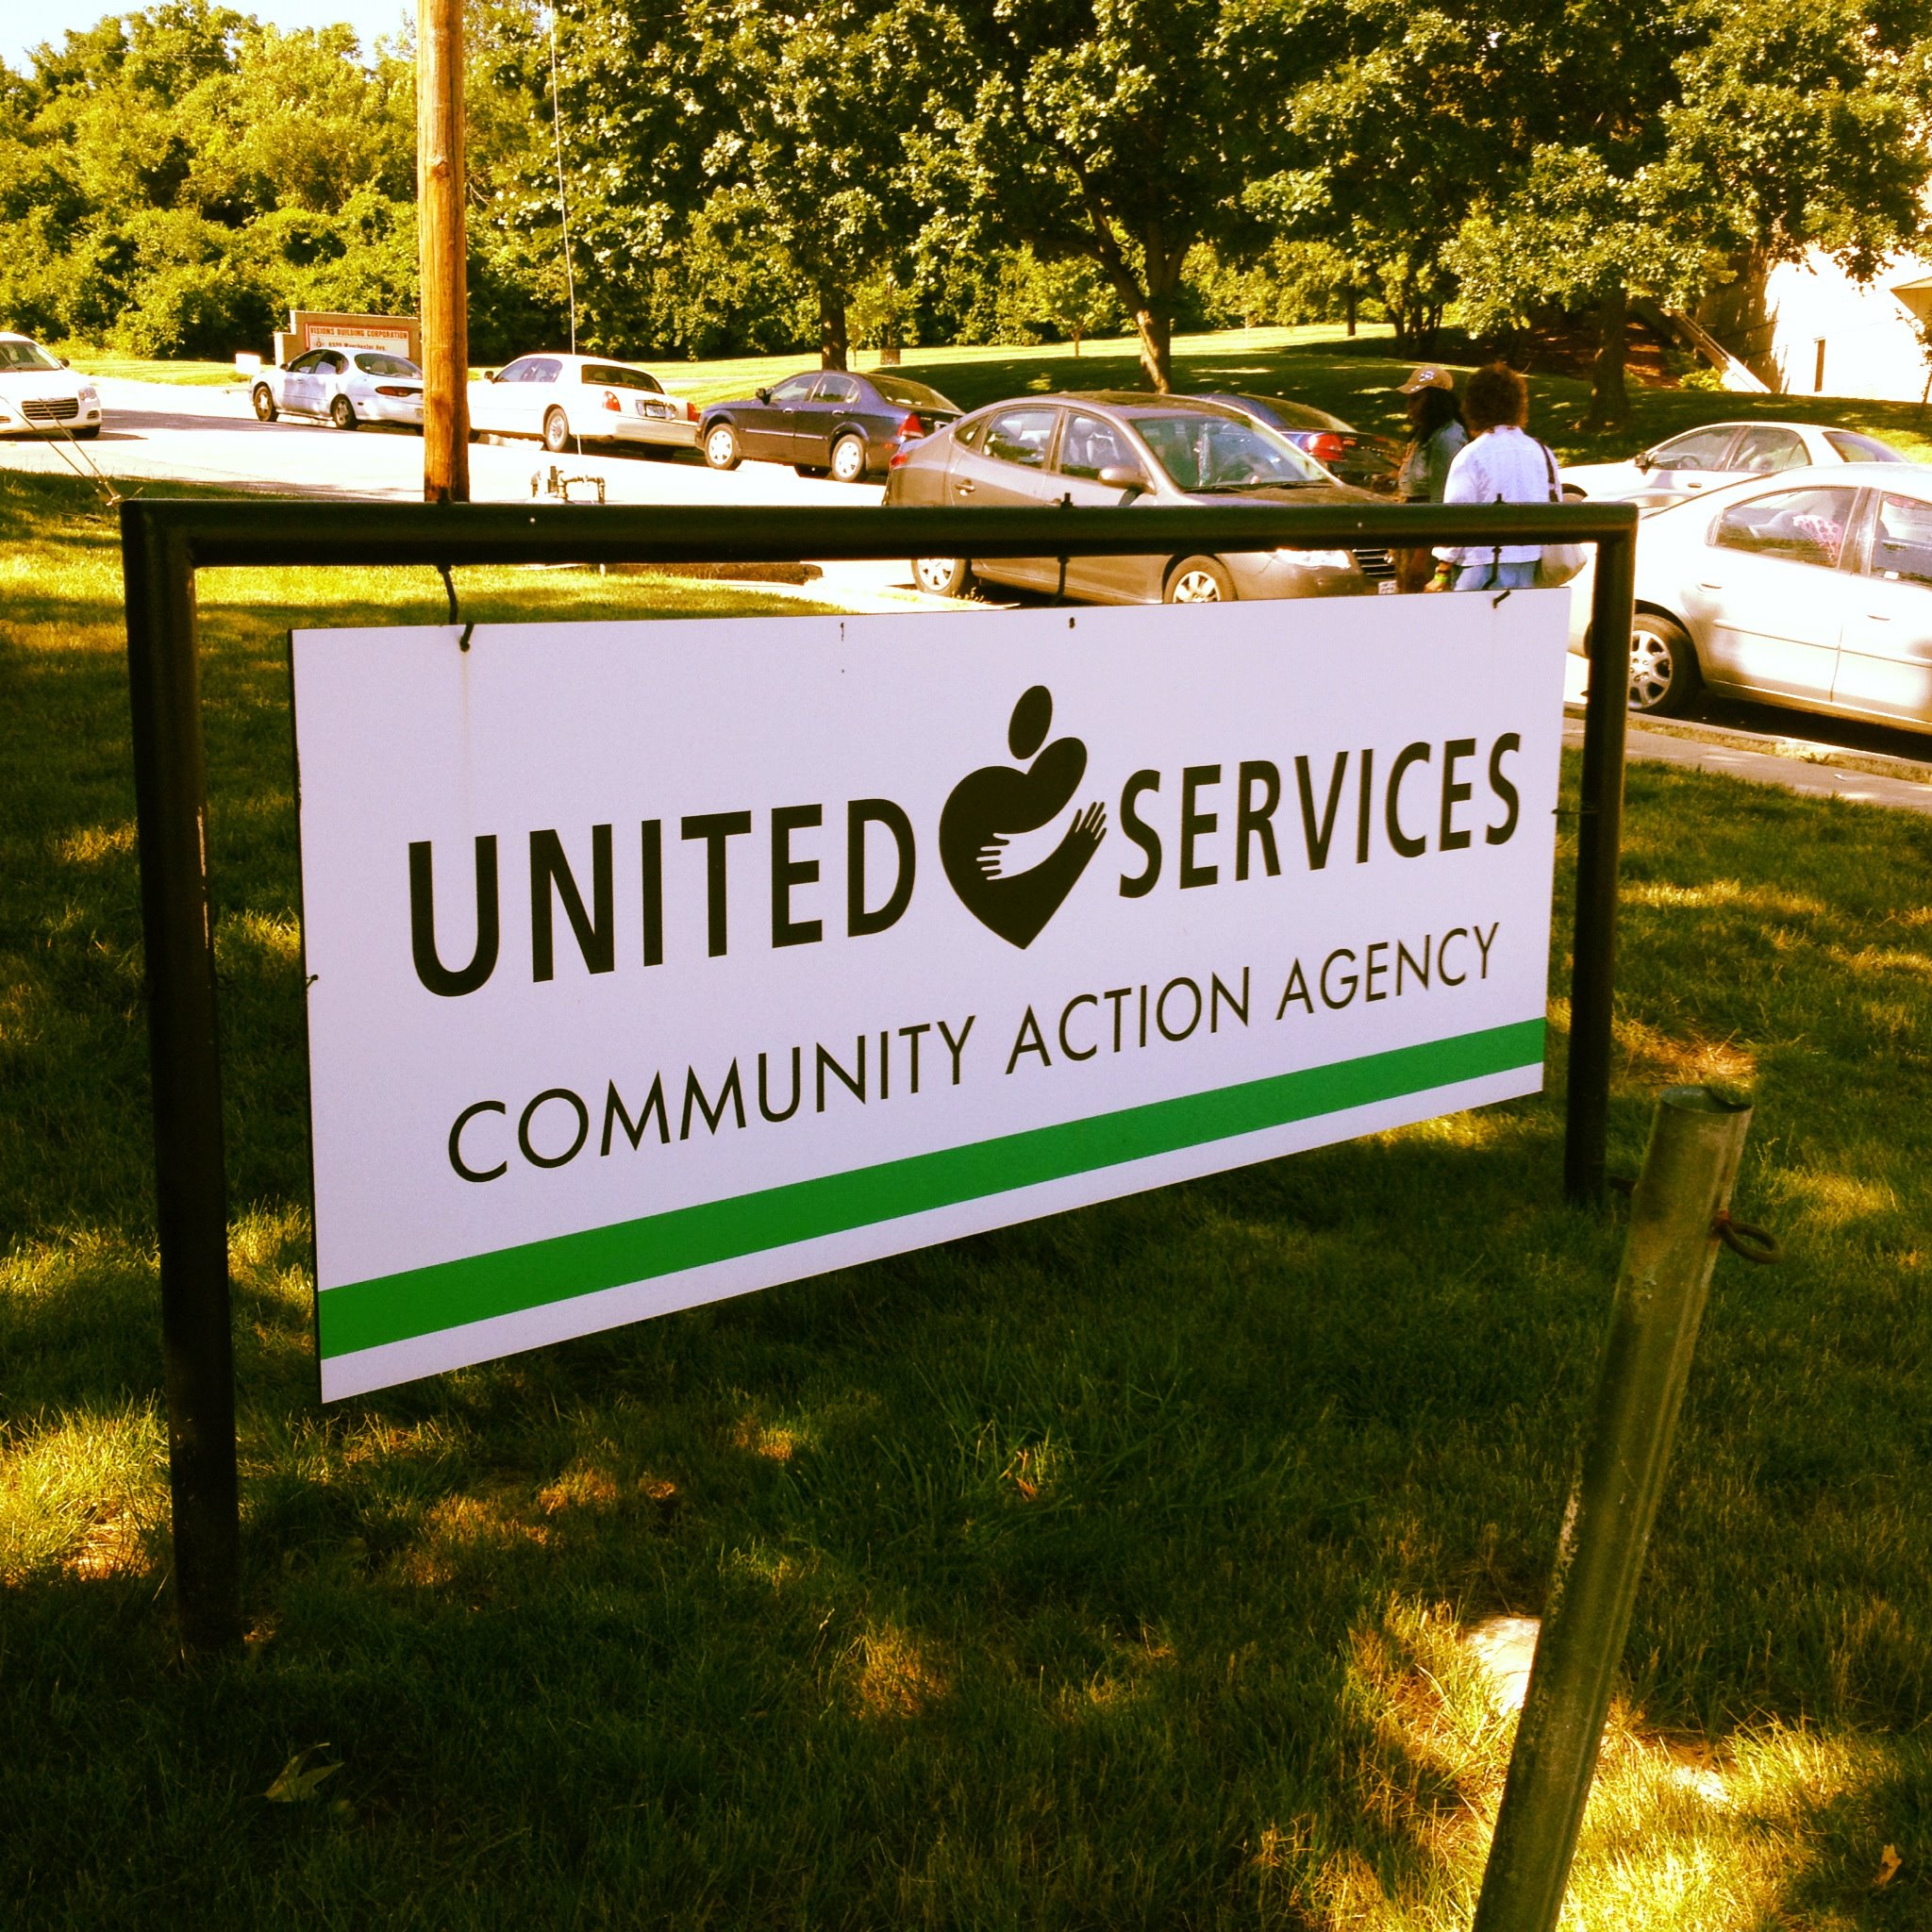 United Services Community Action Agency USCAA